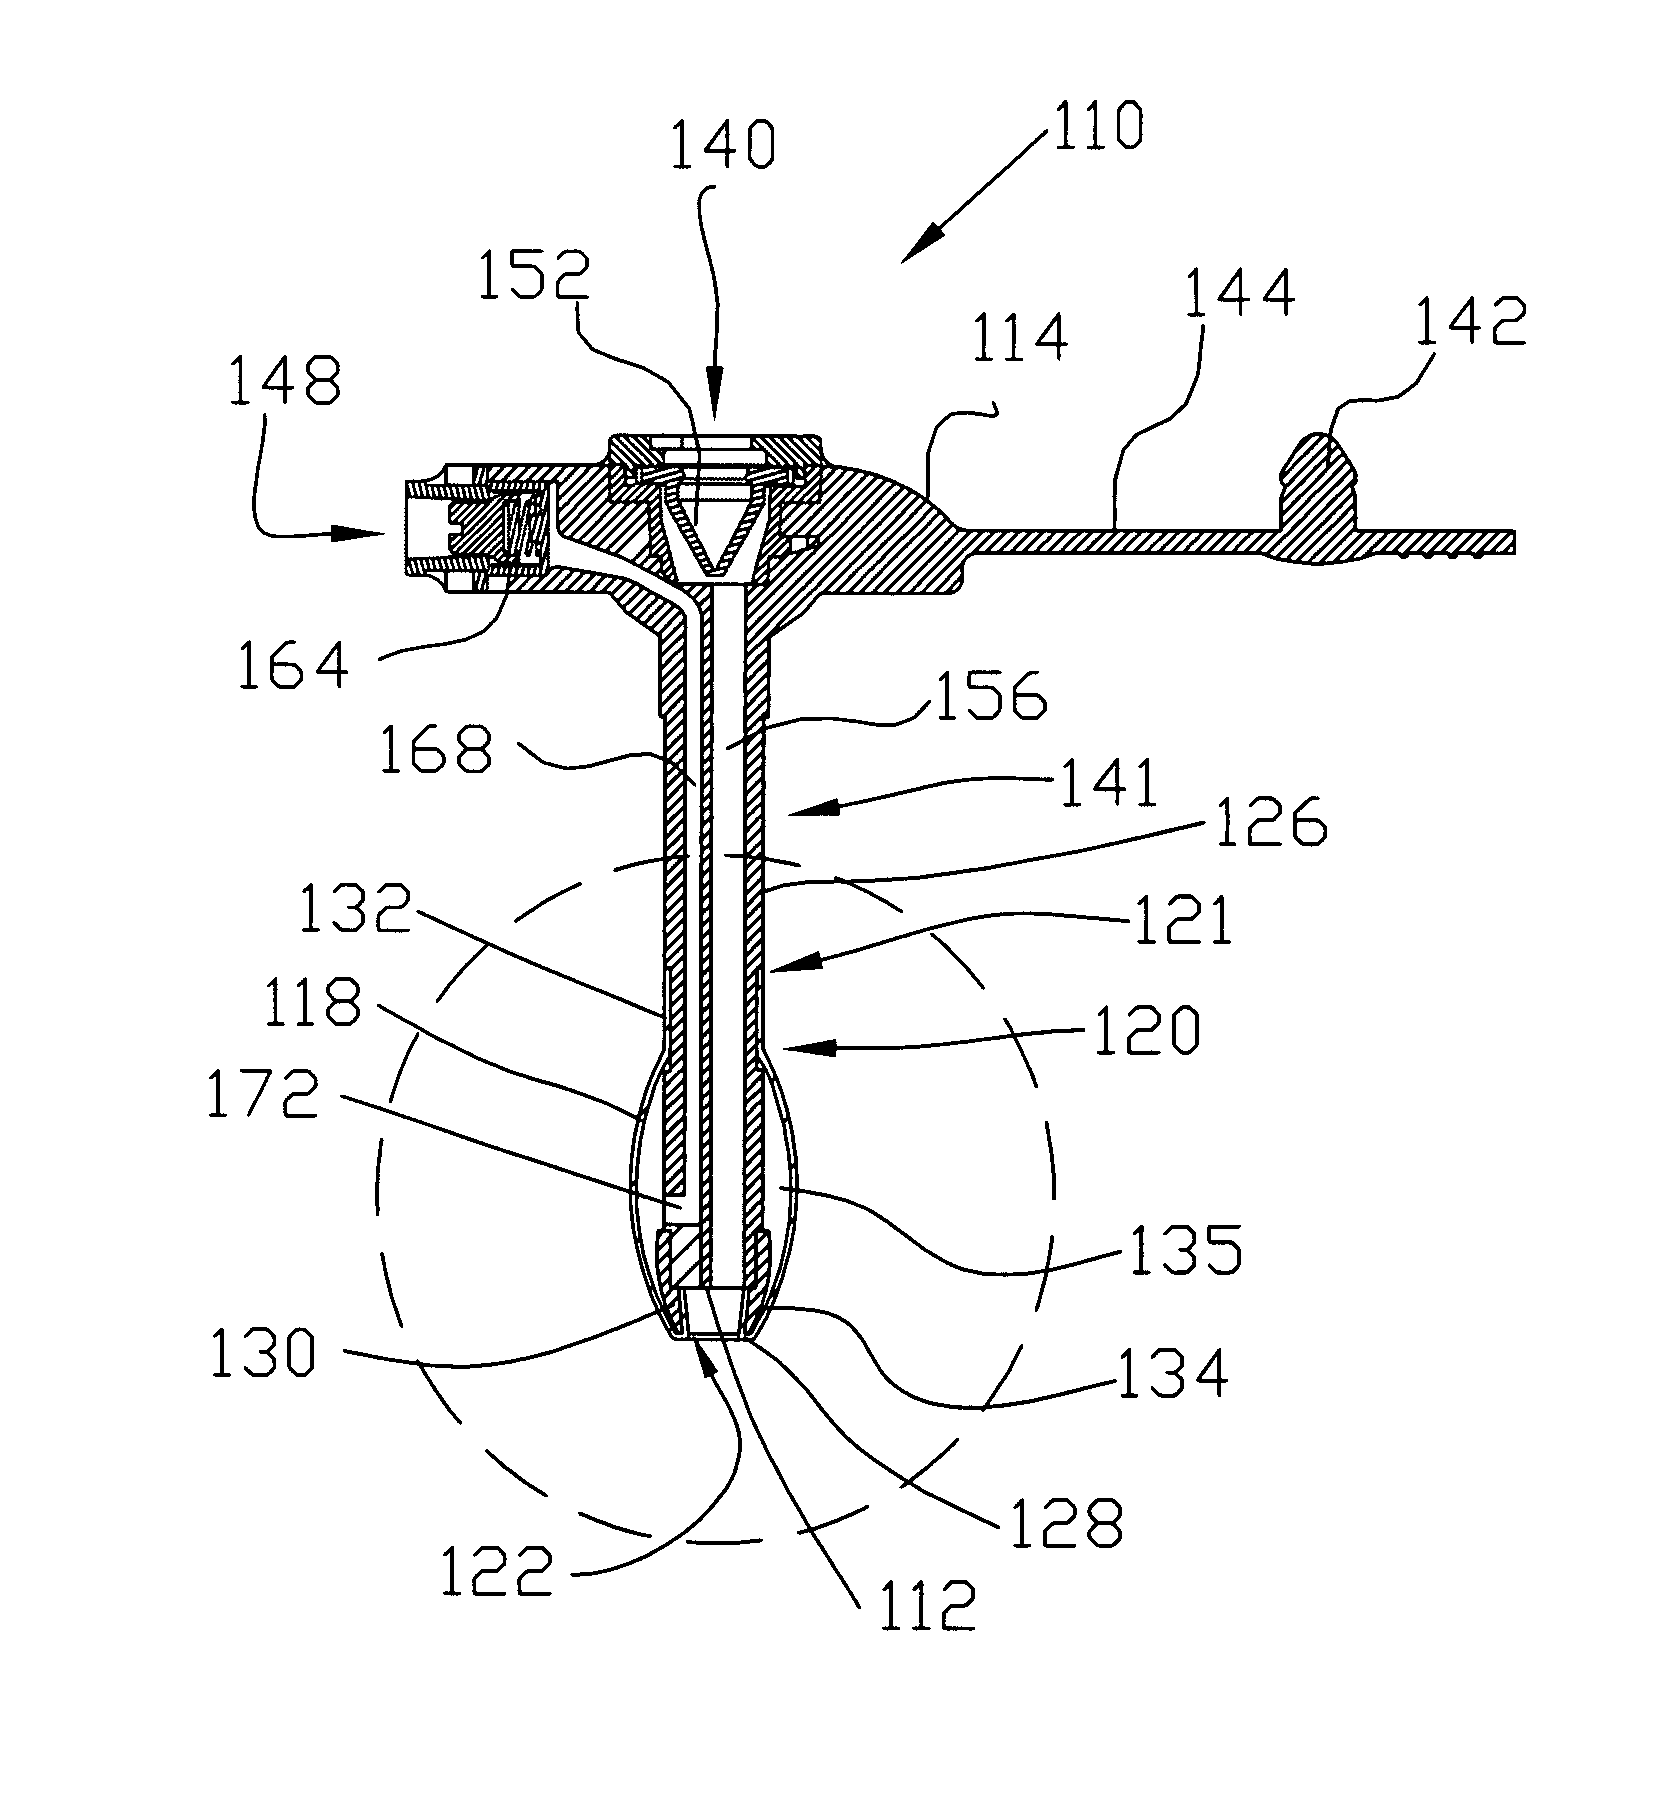 Catheter having a balloon member recessedly attached thereto